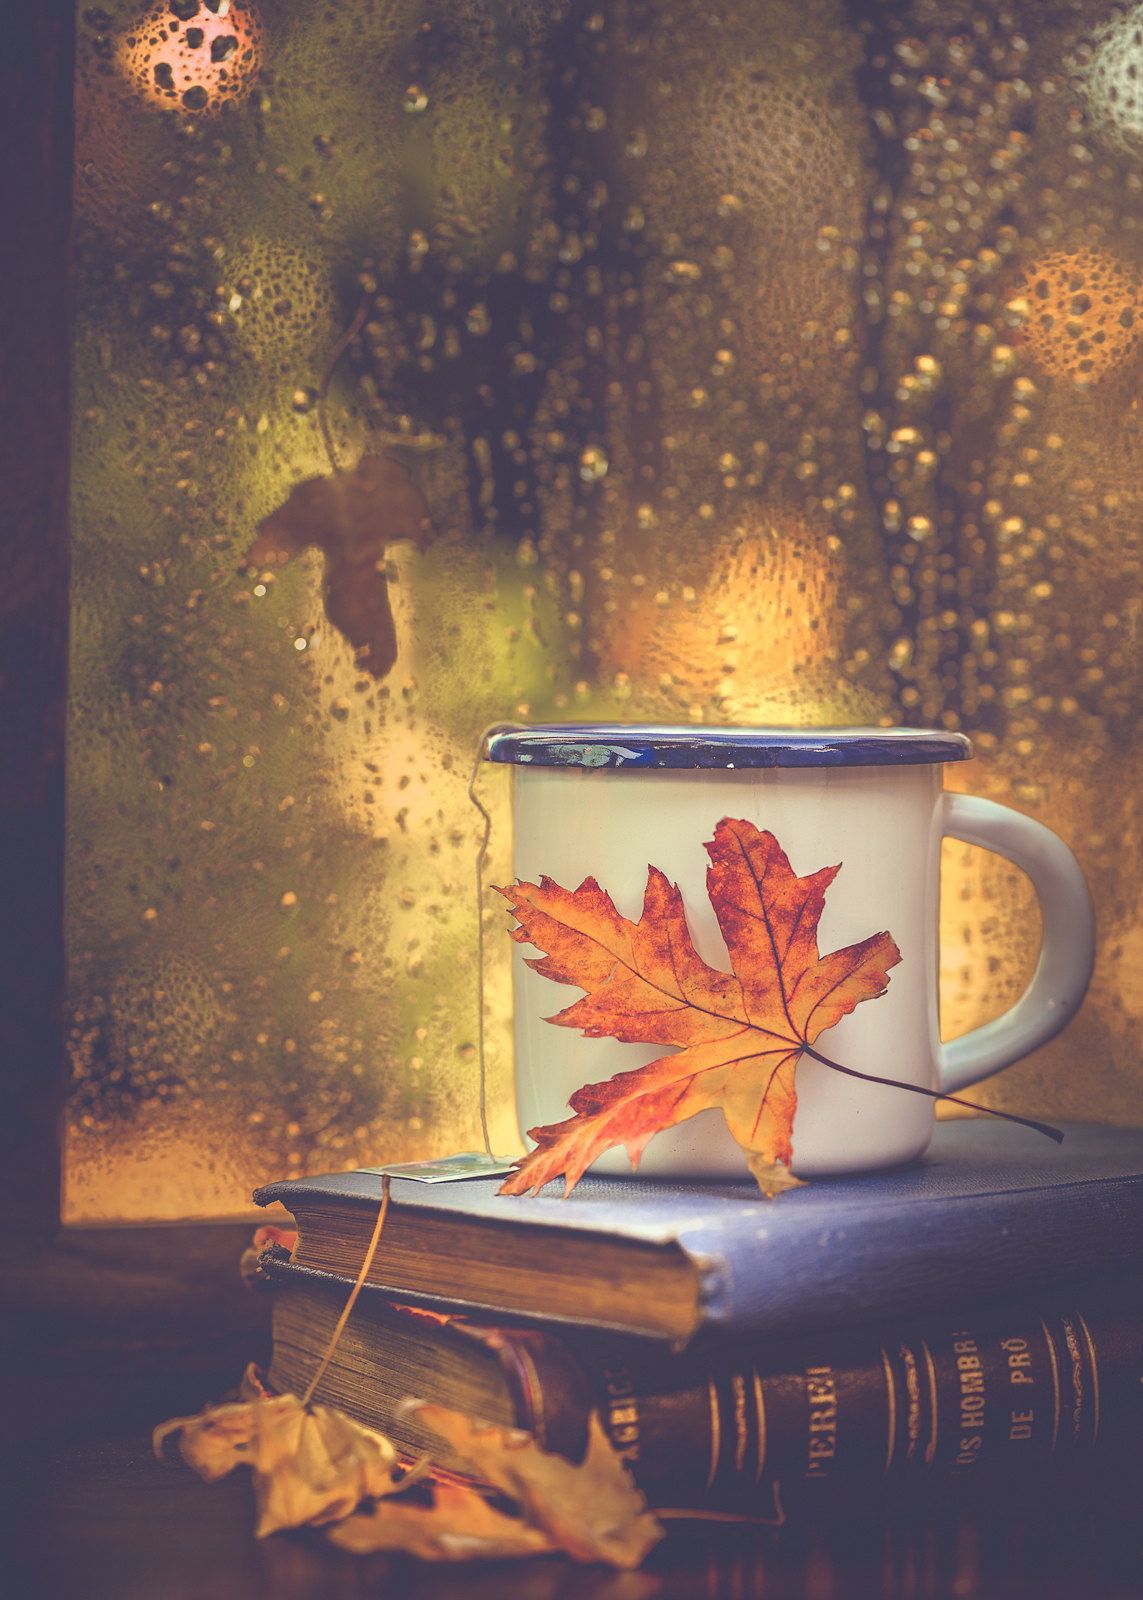 Books, tea and rain drops. Fall photography nature, Rainy day photography, Fall picture